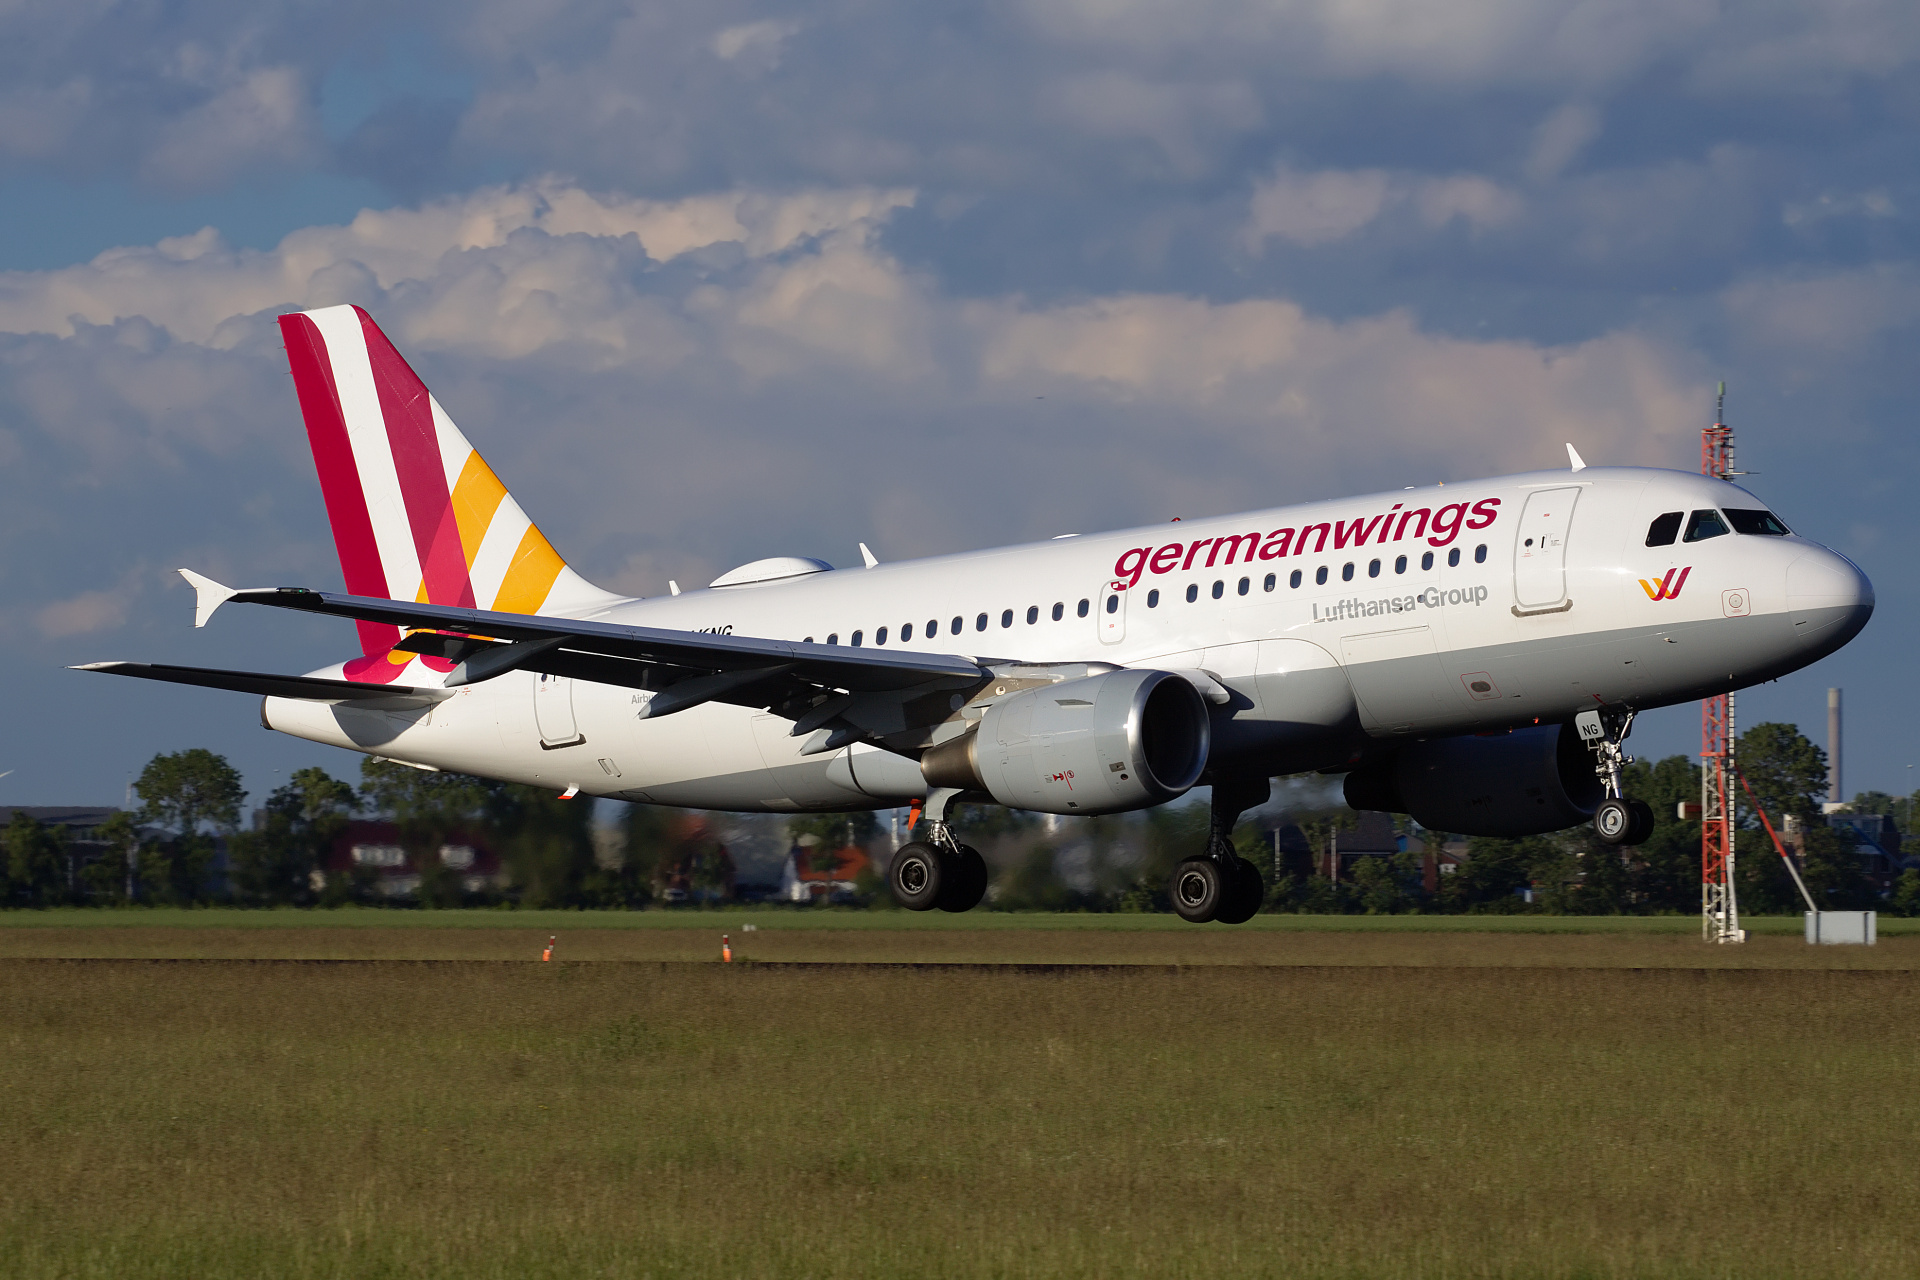 D-AKNG, Germanwings (Eurowings) (Samoloty » Spotting na Schiphol » Airbus A319-100)